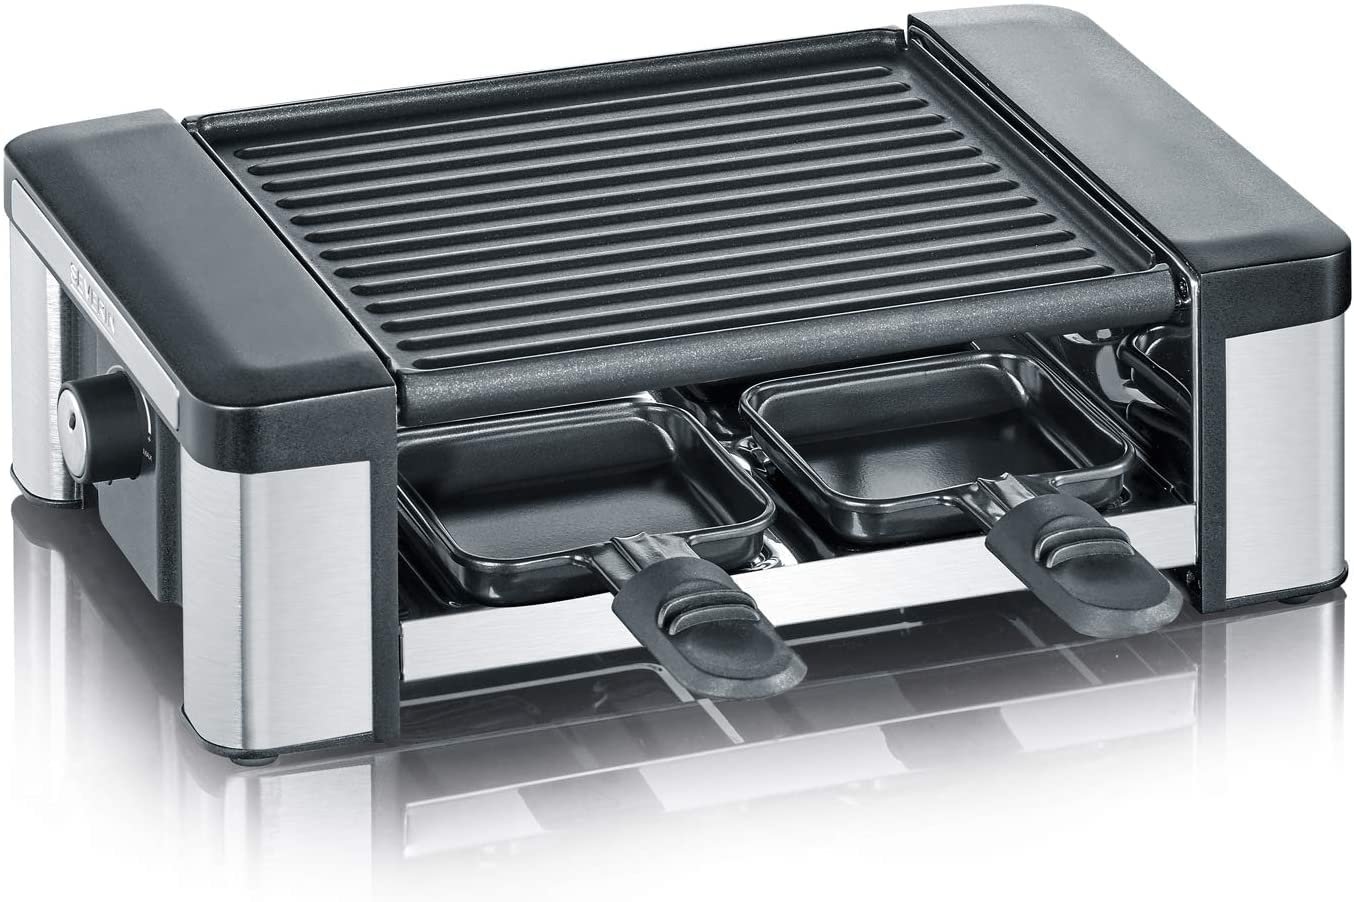 Severin RG 2674 Raclette Grill, Brushed Stainless Steel / Black